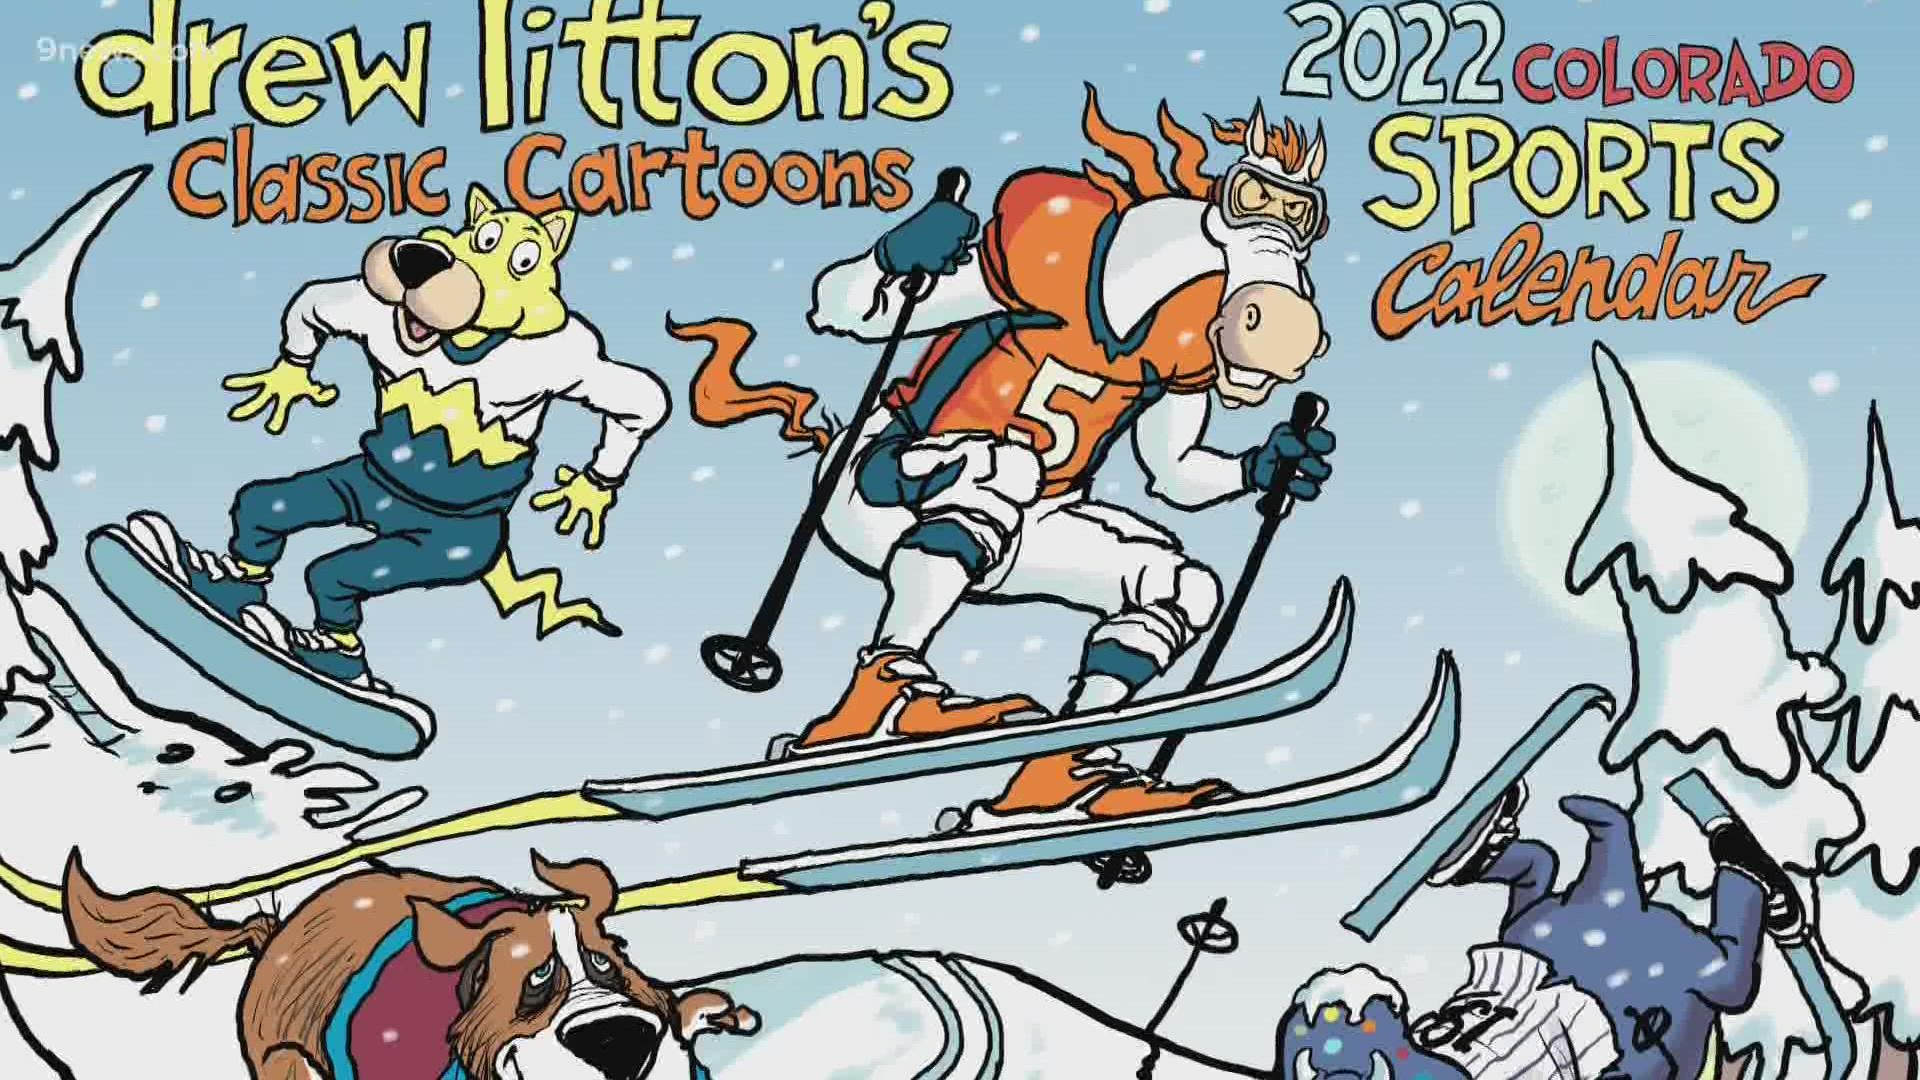 Cartoonist Drew Litton's career will reach a milestone 40th year in 2022. Litton takes a look back at where it all began.